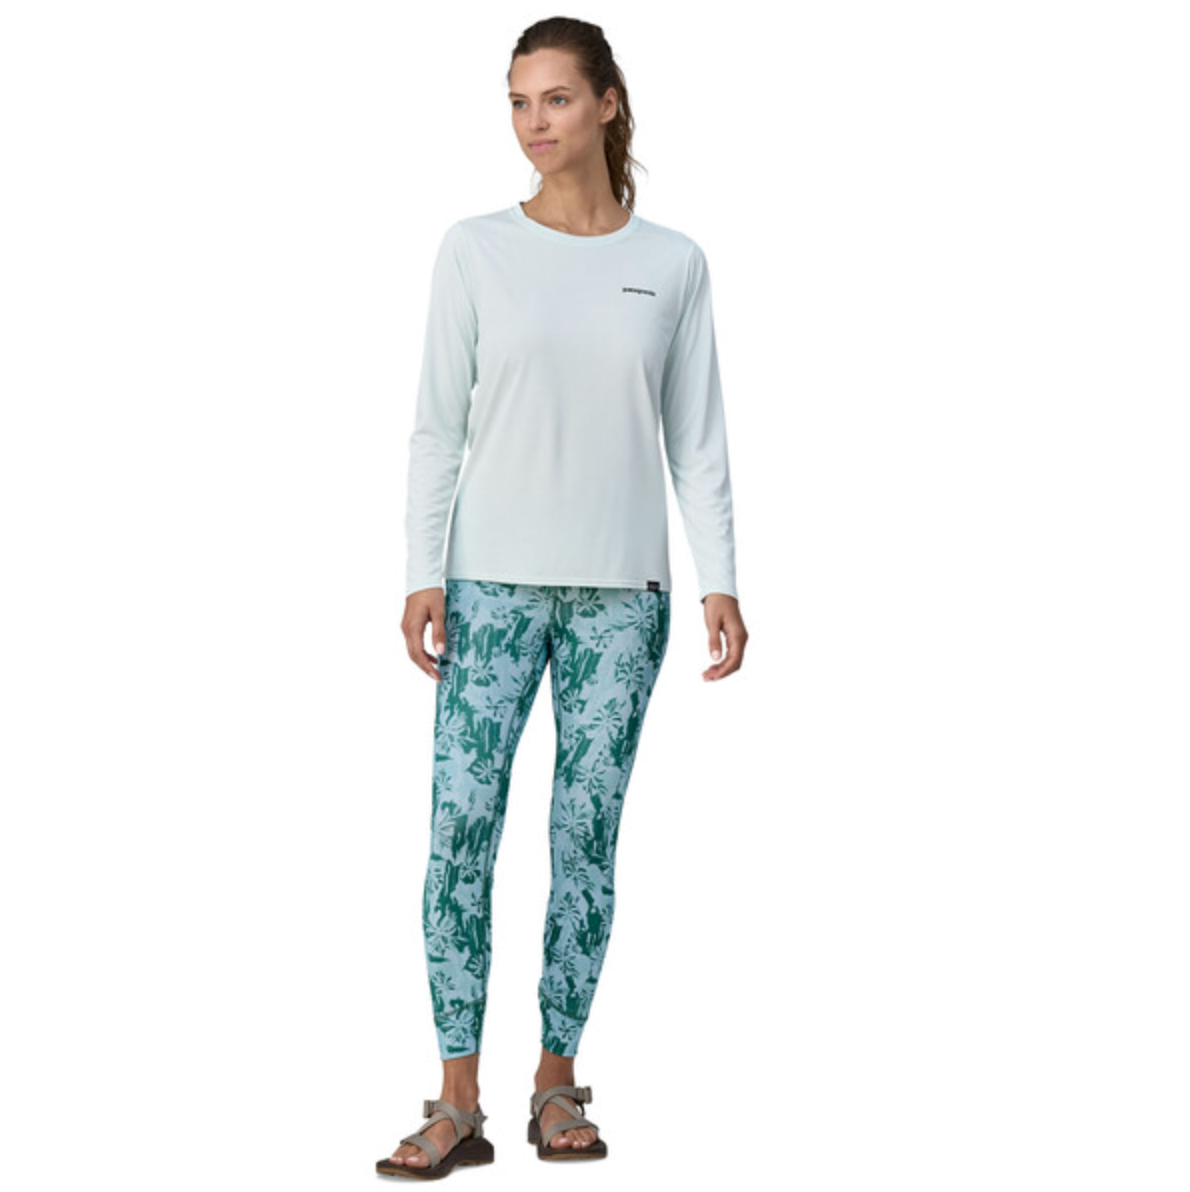 Patagonia Women's Tropic Comfort Sun Tights - Cliffs and Waves: Wispy Green